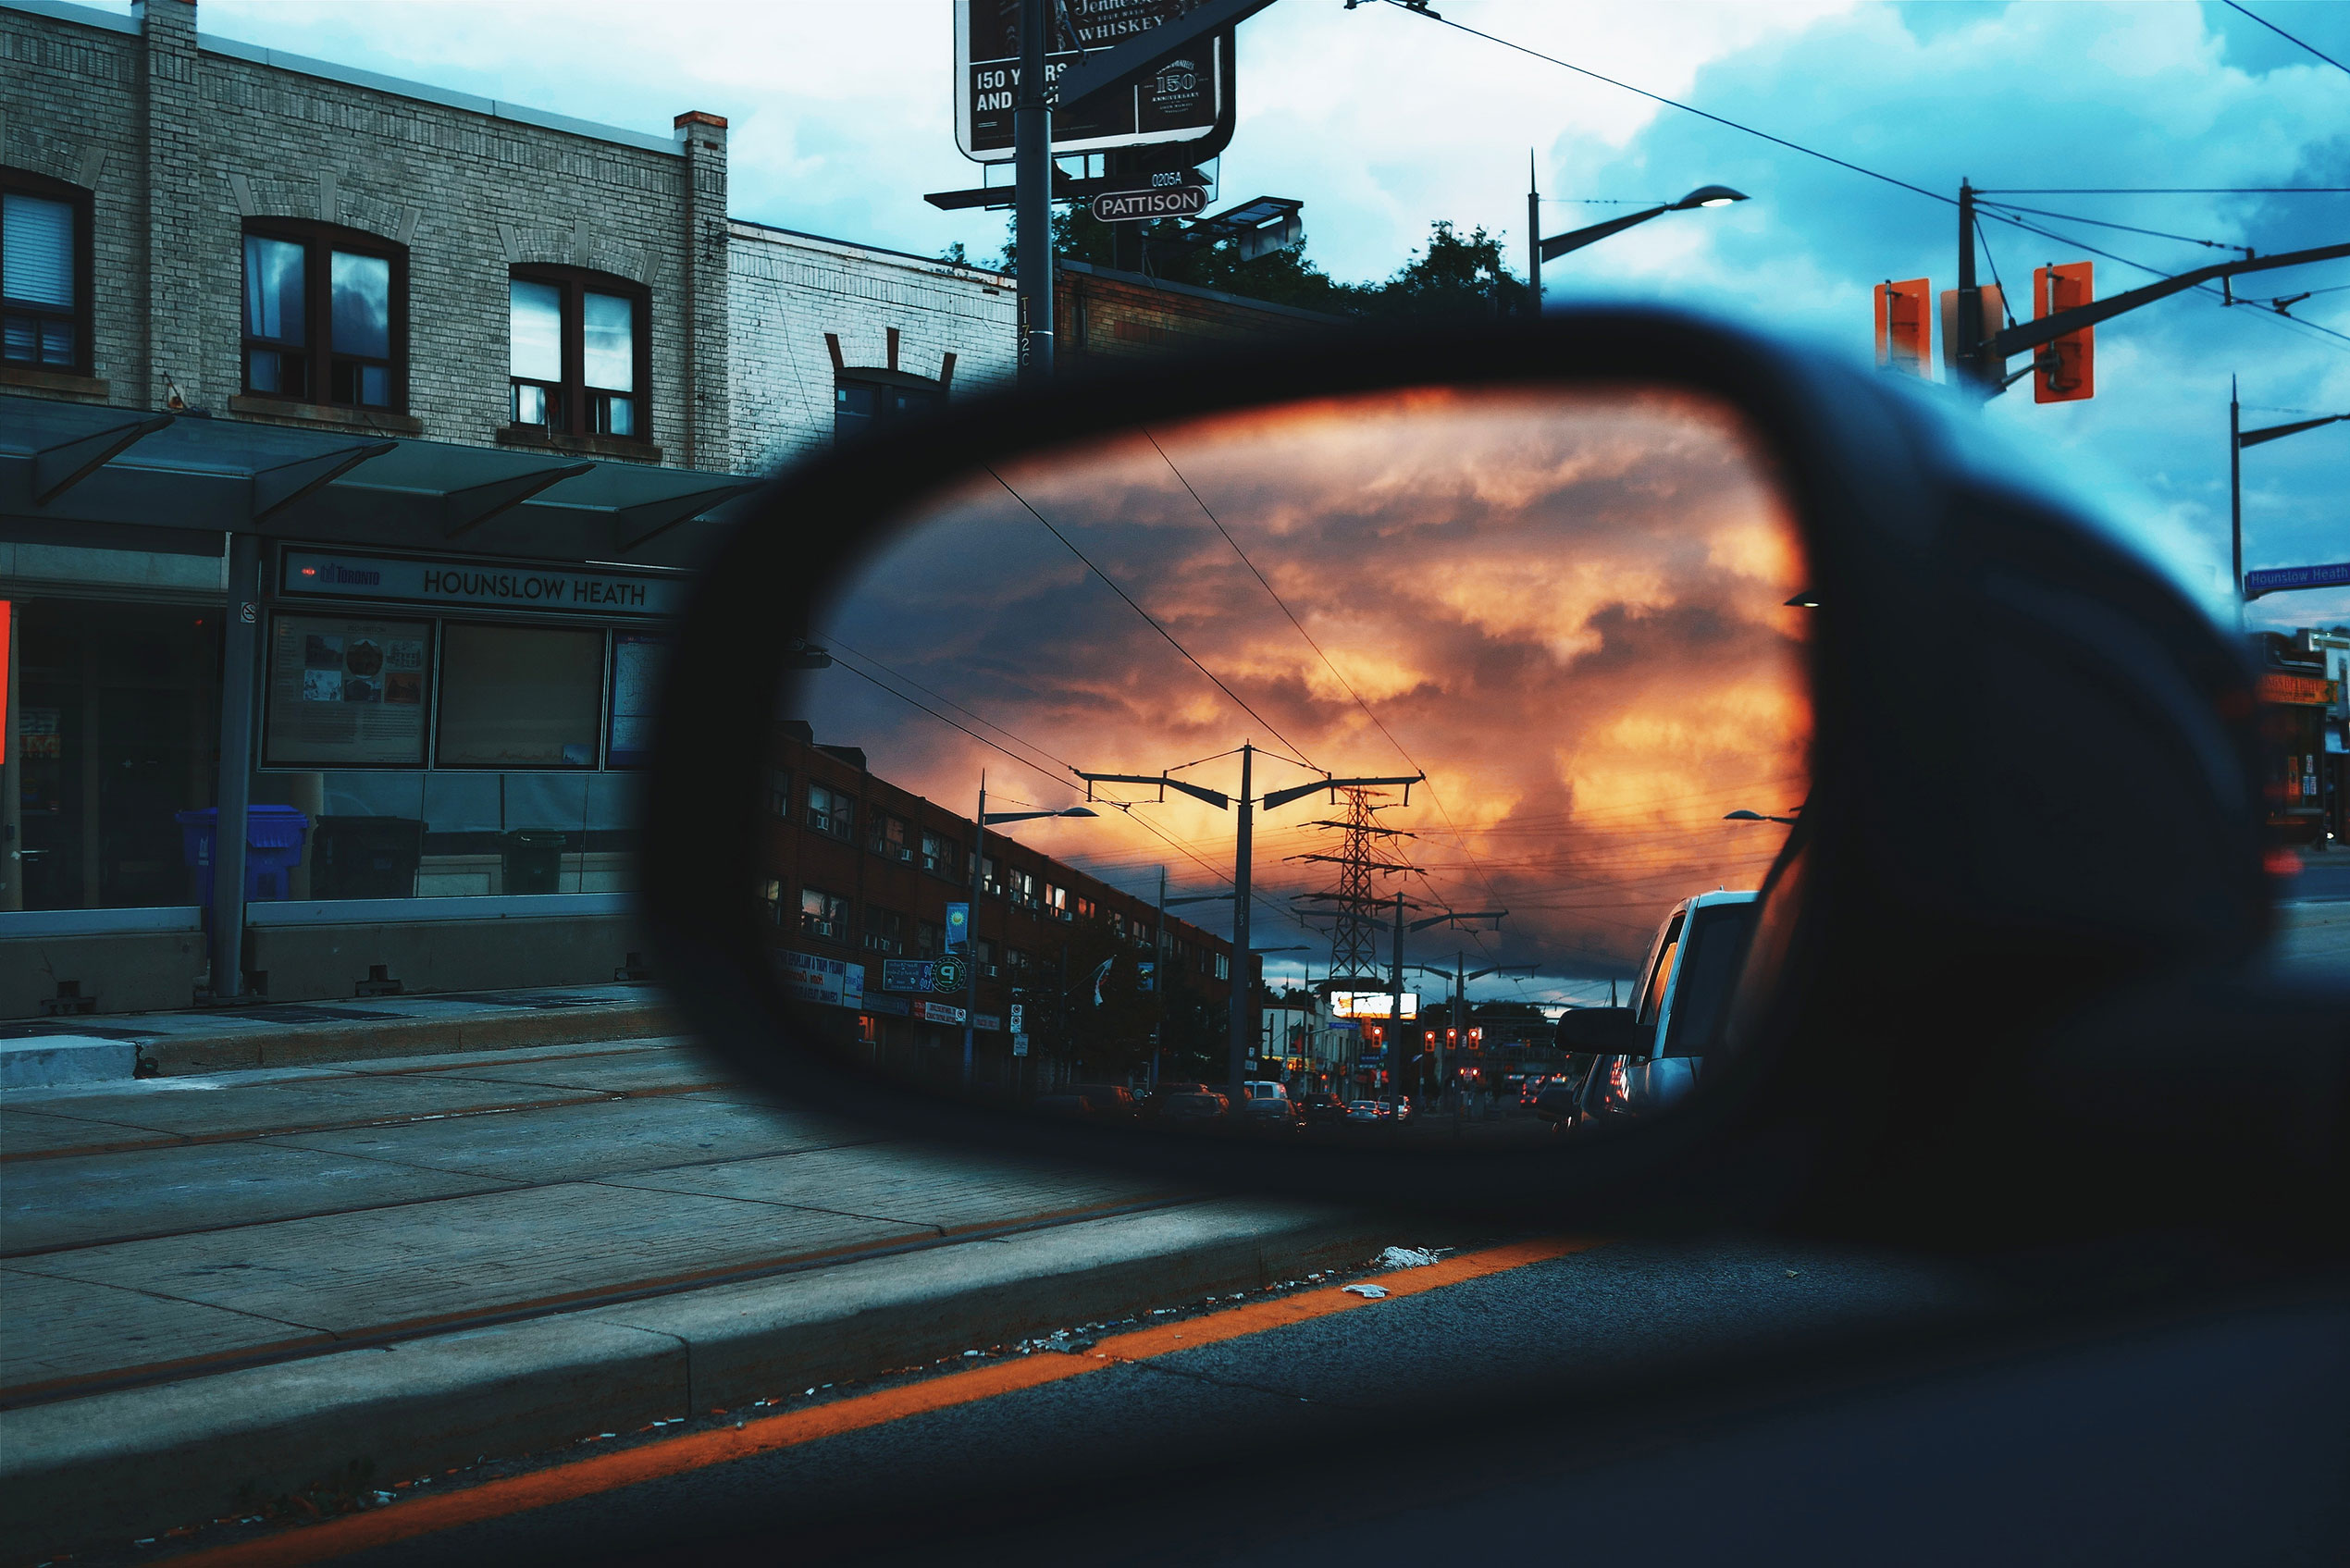 Photo showing the driver's side car mirror reflecting an orange sunset, with the car visibly traveling down a city street with distant street lights.